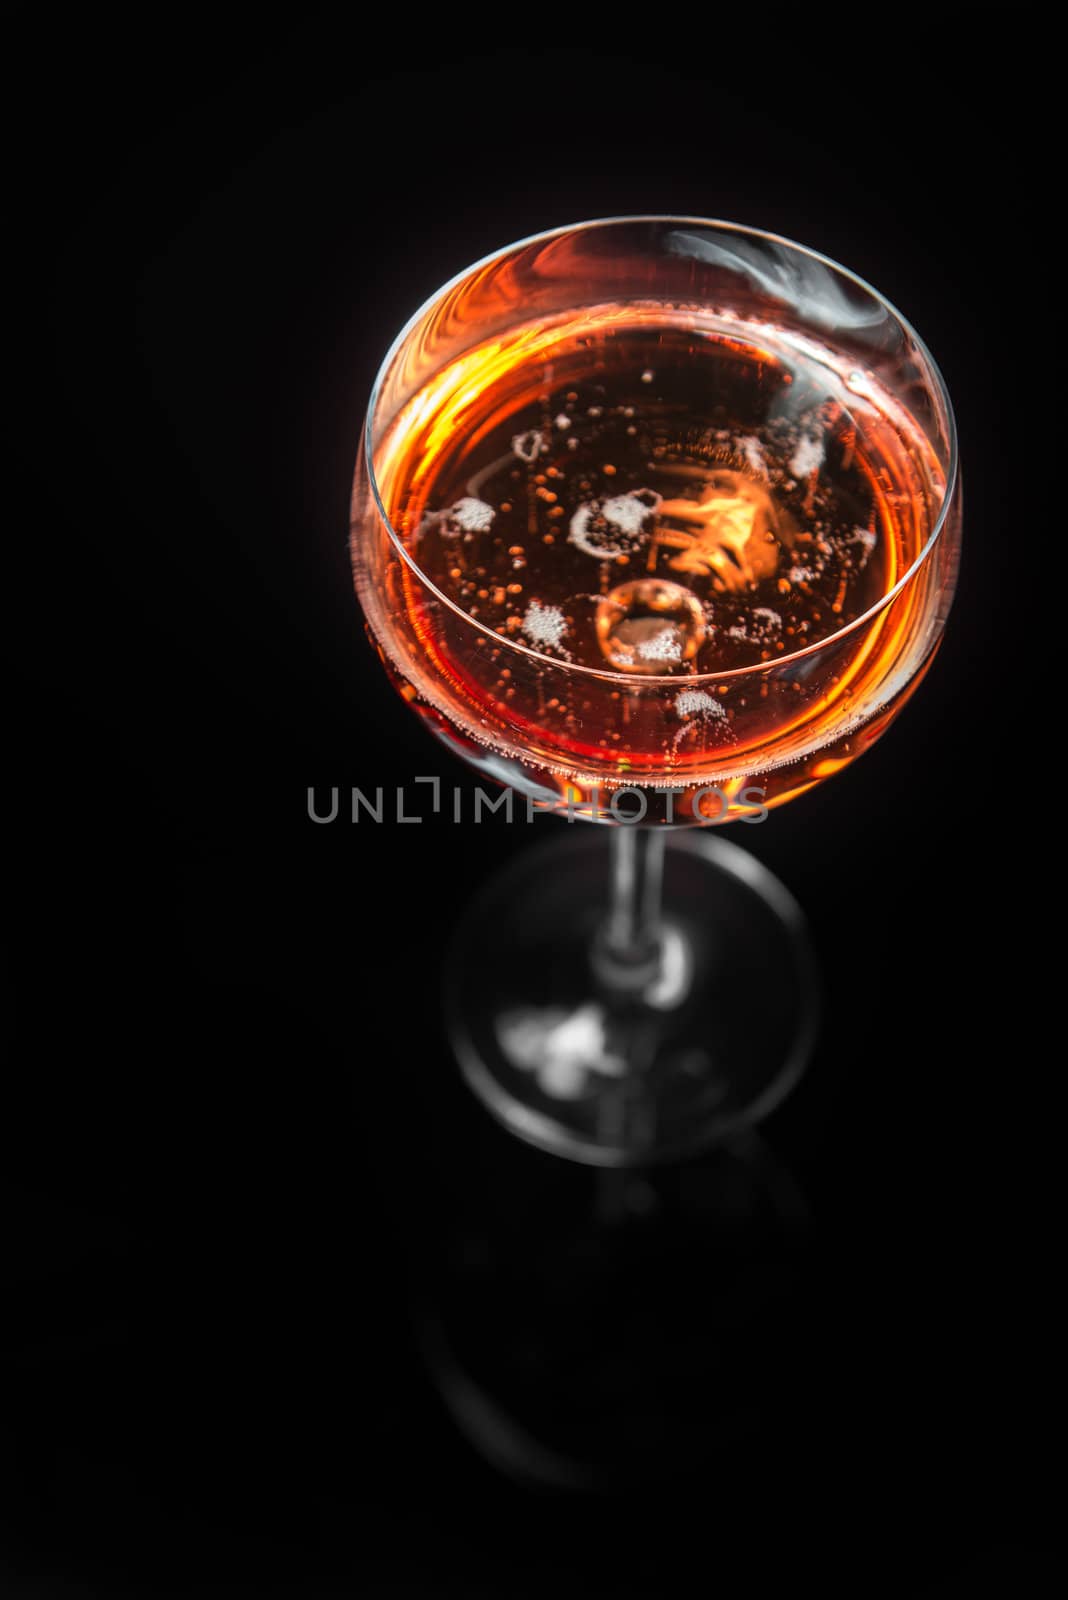 Red wine poured into translucent wine glass